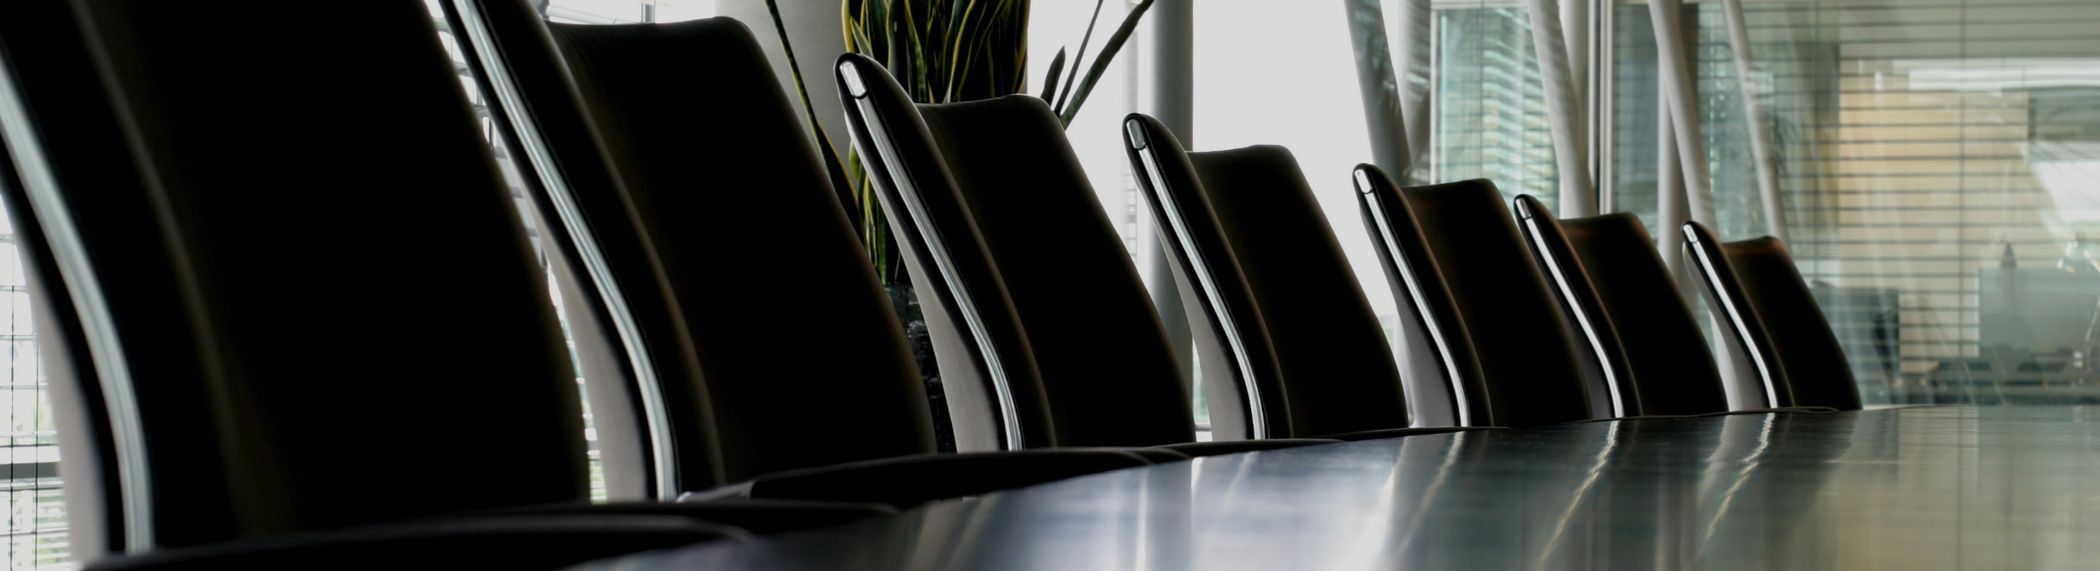 Black seats at a boardroom table in a room with windows